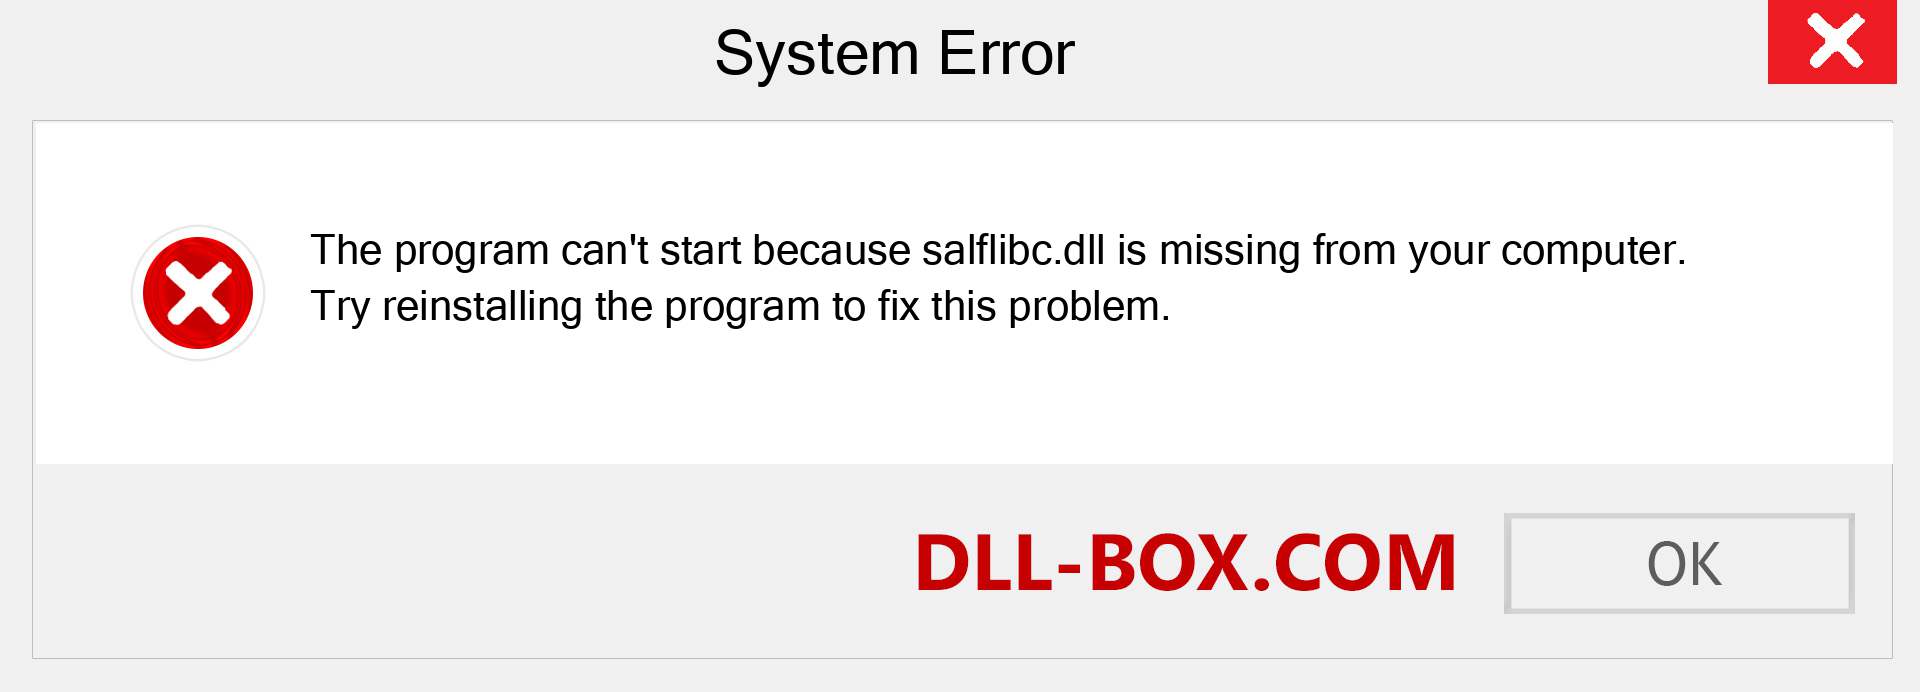  salflibc.dll file is missing?. Download for Windows 7, 8, 10 - Fix  salflibc dll Missing Error on Windows, photos, images